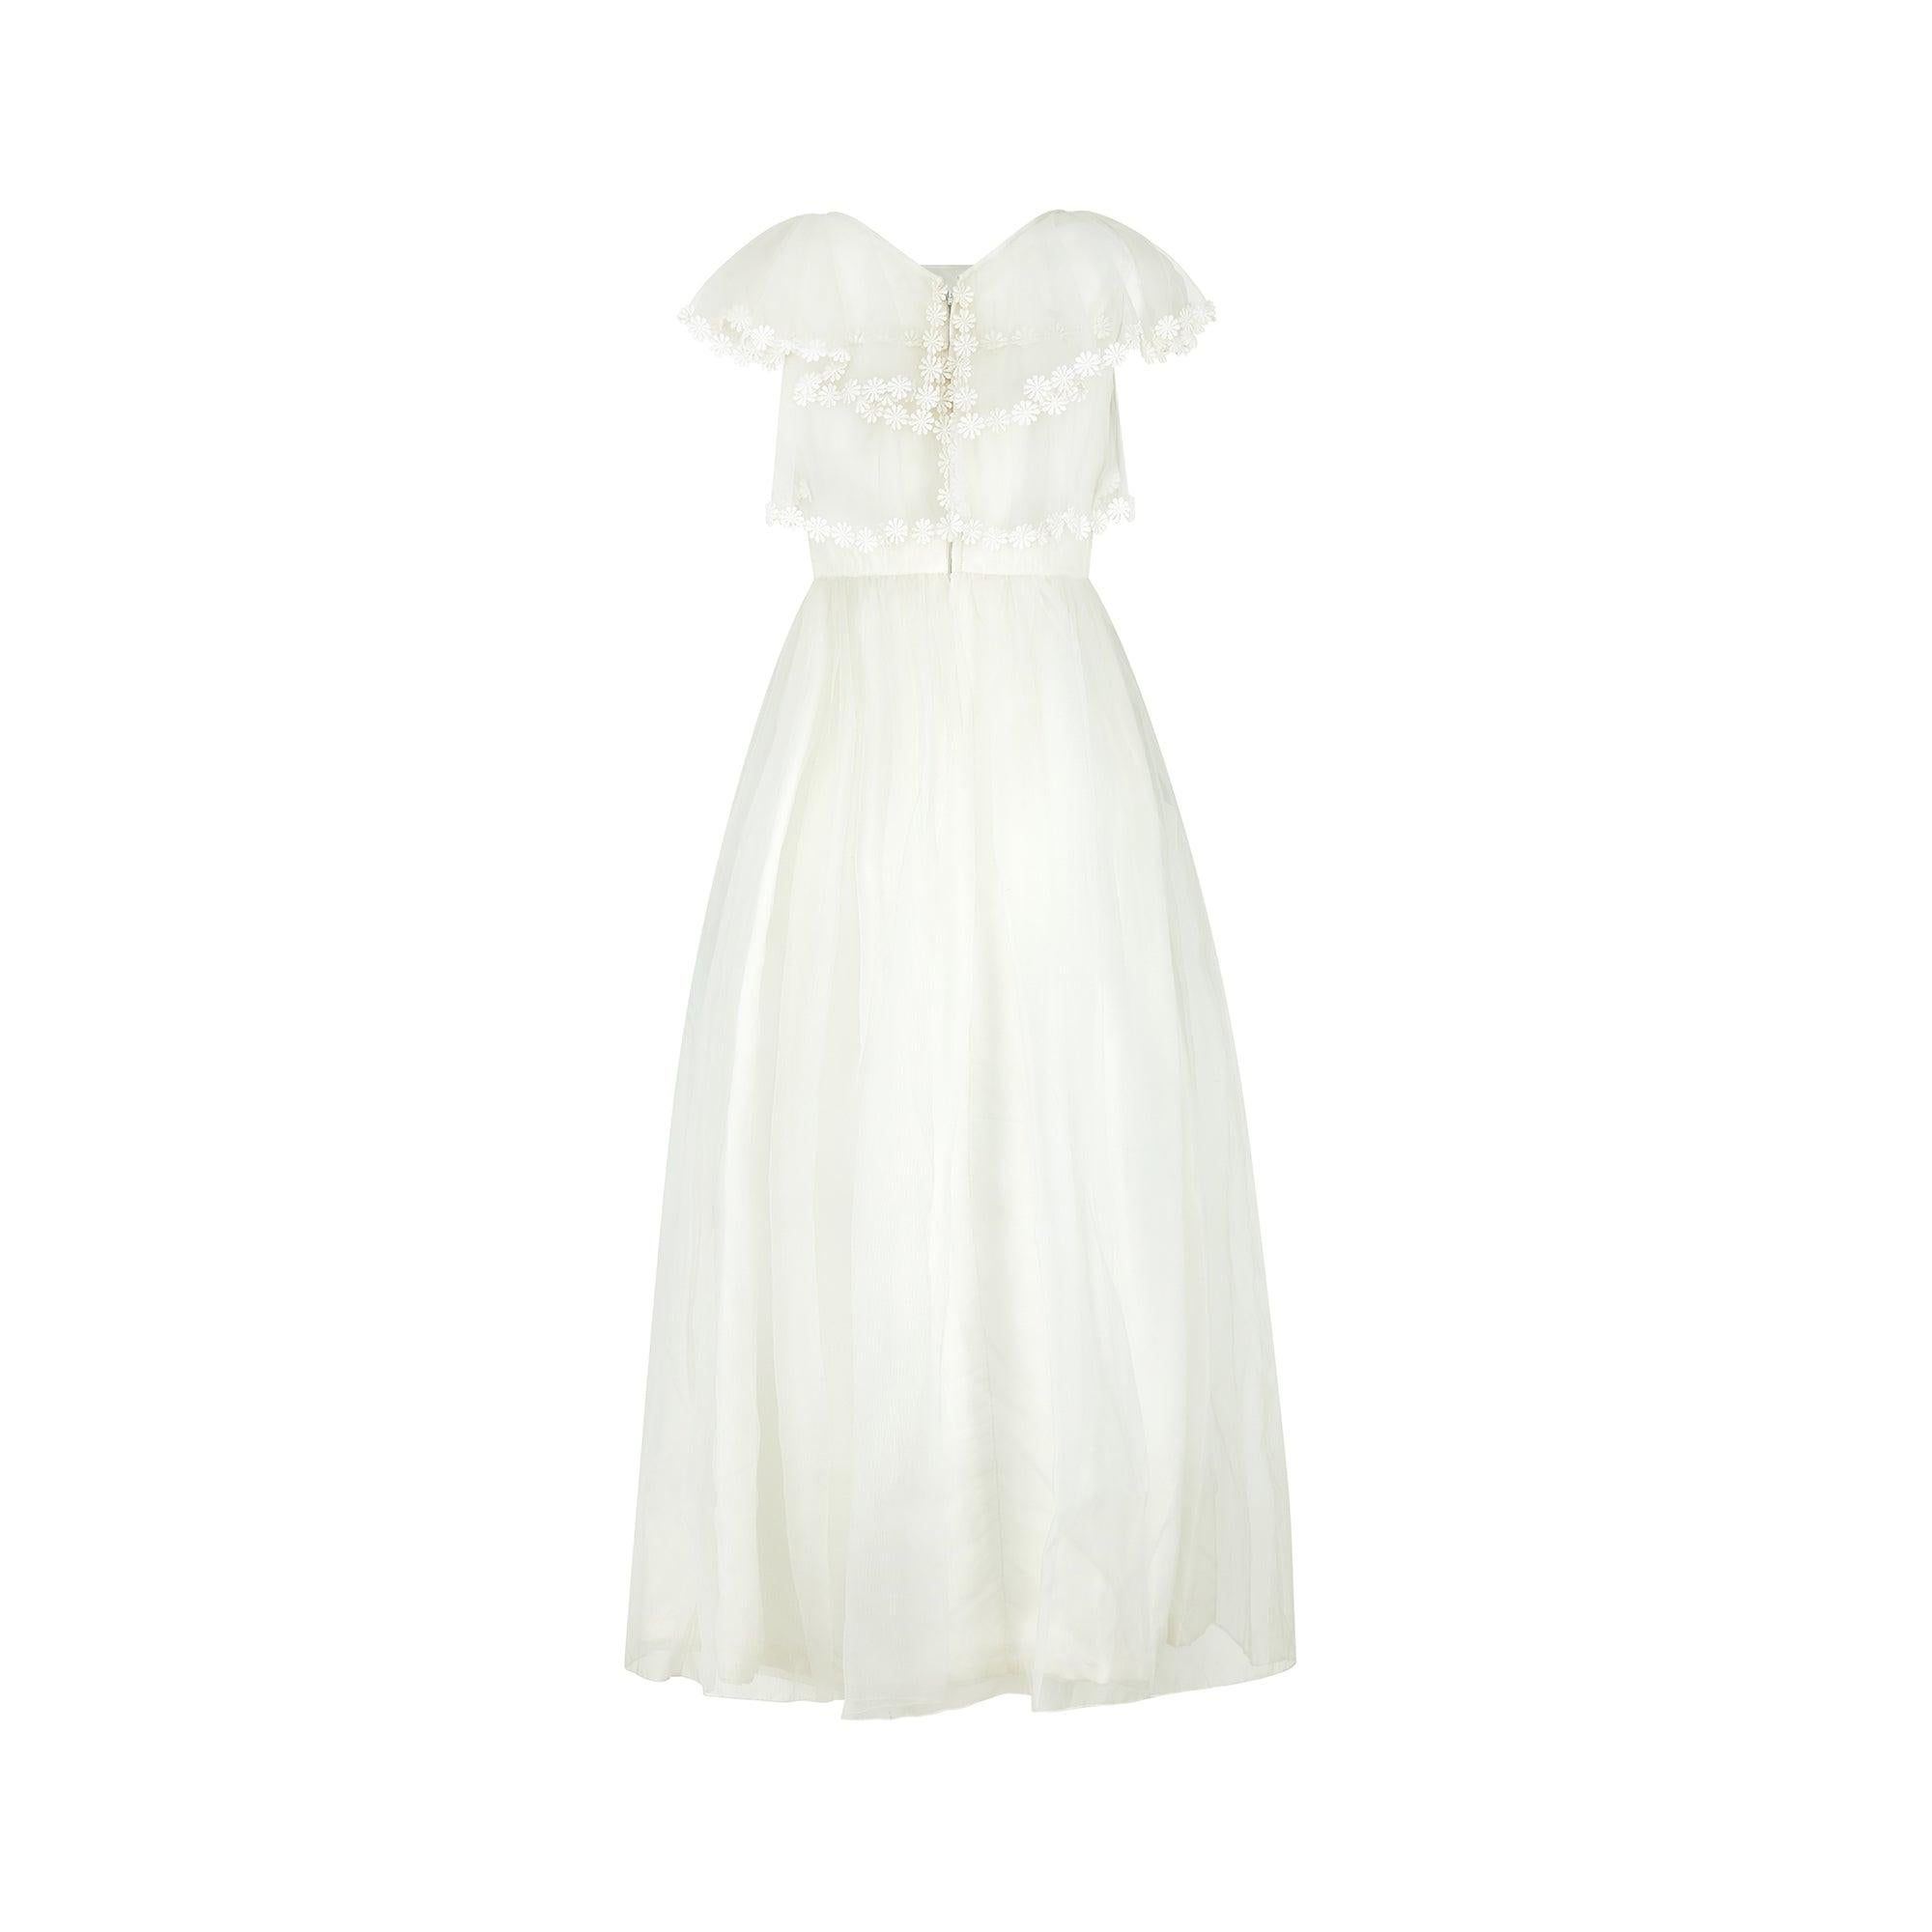 1960s Georgette Wedding Dress with Daisy Lace Trim In Excellent Condition For Sale In London, GB